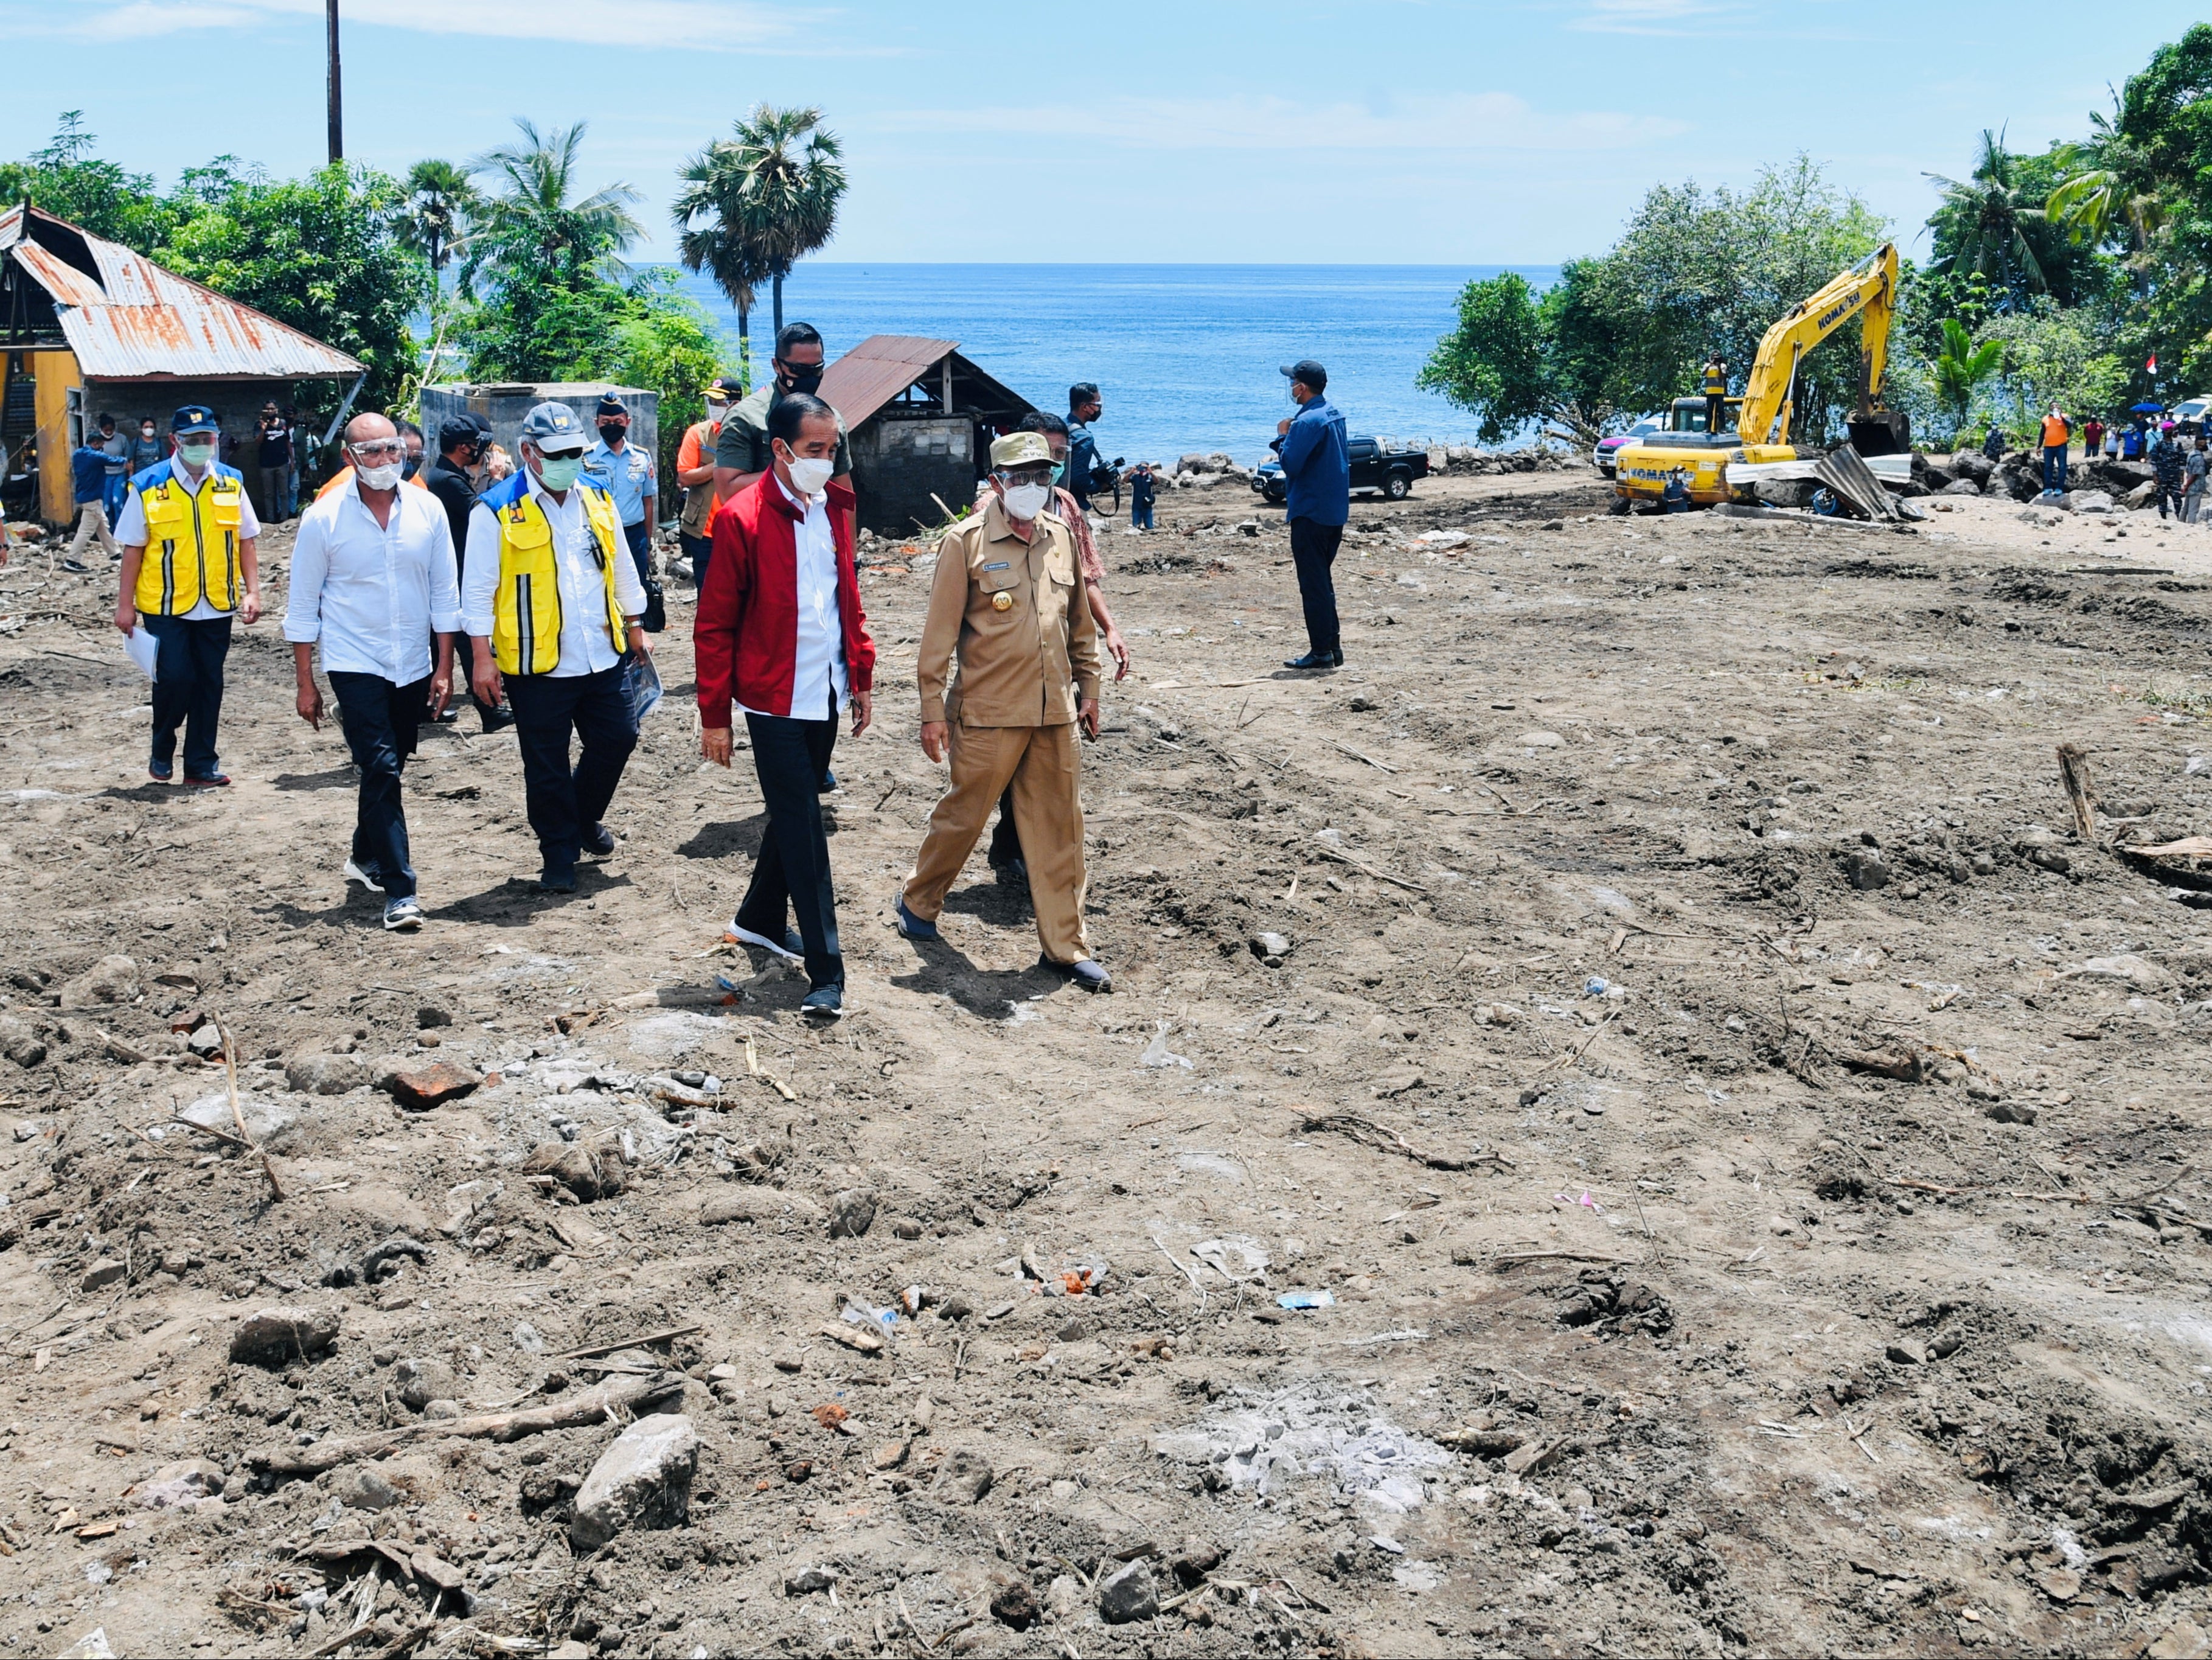 Indonesian President Joko Widodo visits an area affected by flash floods triggered by a tropical cyclone Seroja